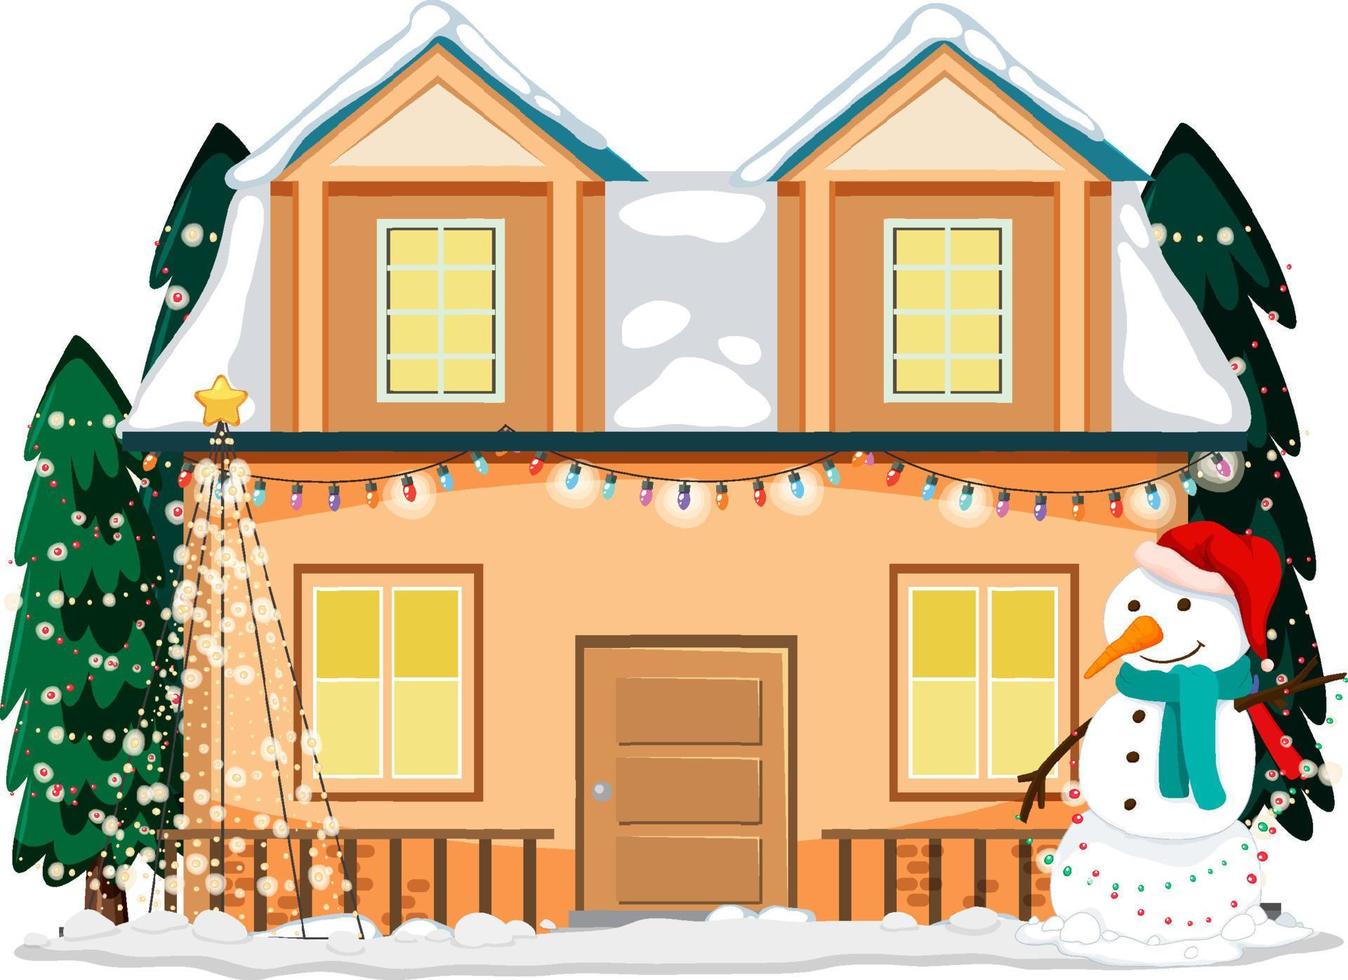 Snow covered house with Christmas light string and snowman vector